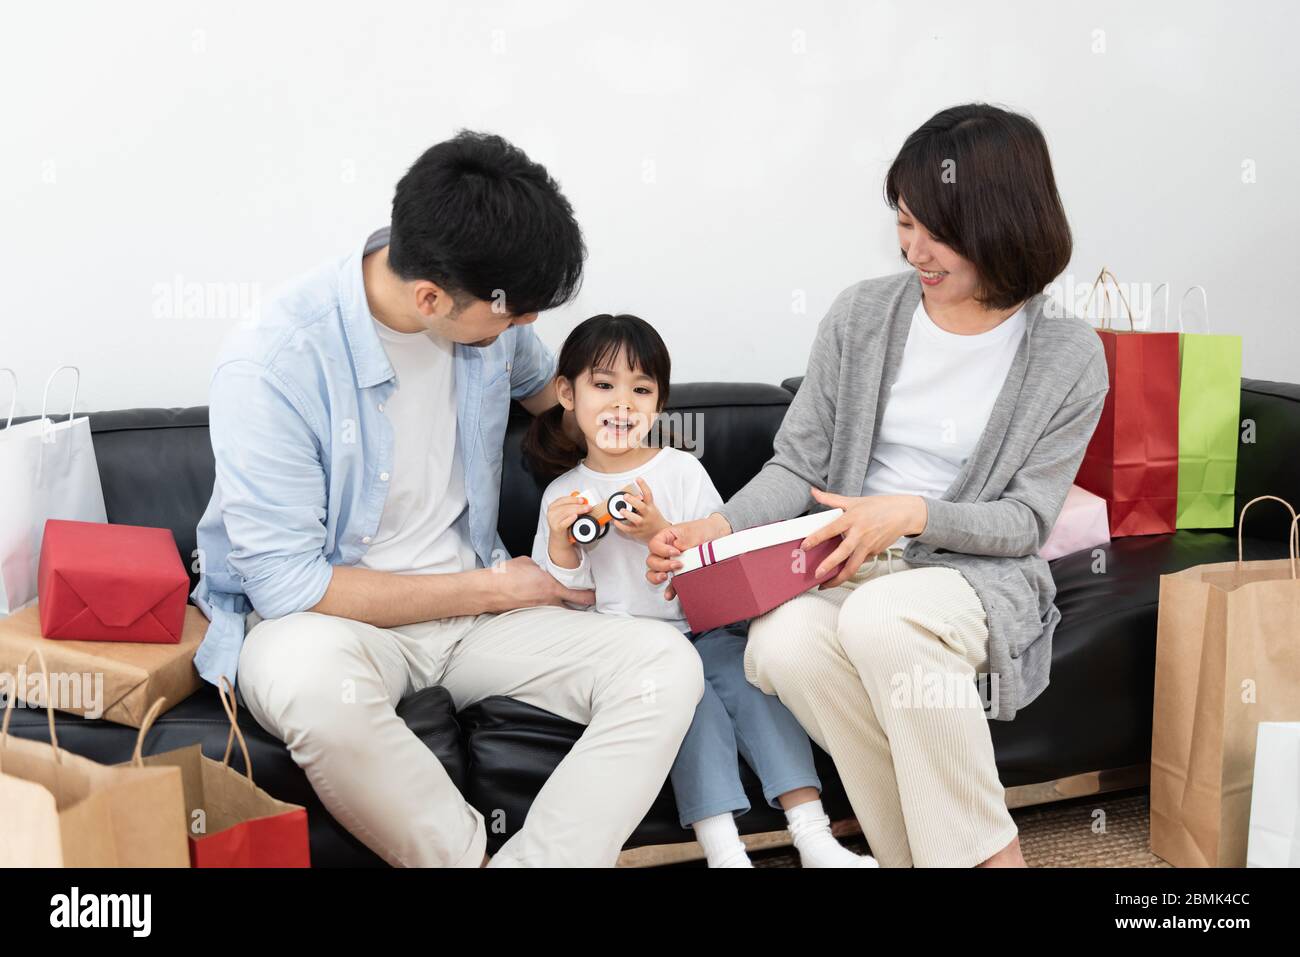 https://c8.alamy.com/comp/2BMK4CC/young-asian-mom-and-dad-are-unpacking-gifts-with-their-daughter-2BMK4CC.jpg